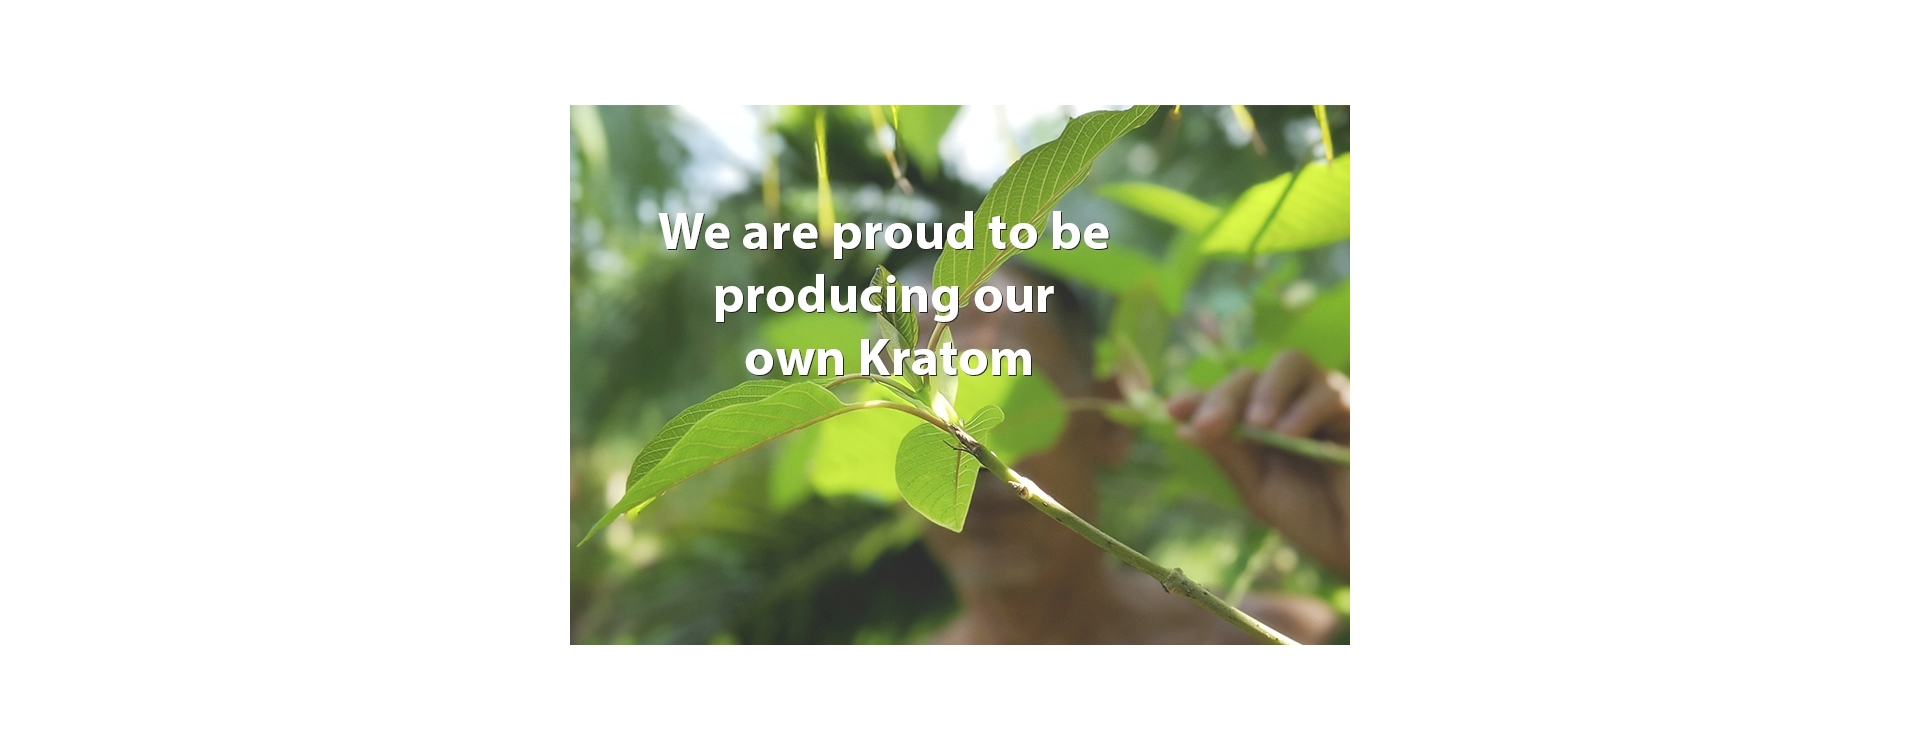 Our Own Kratom Factory in Indonesia